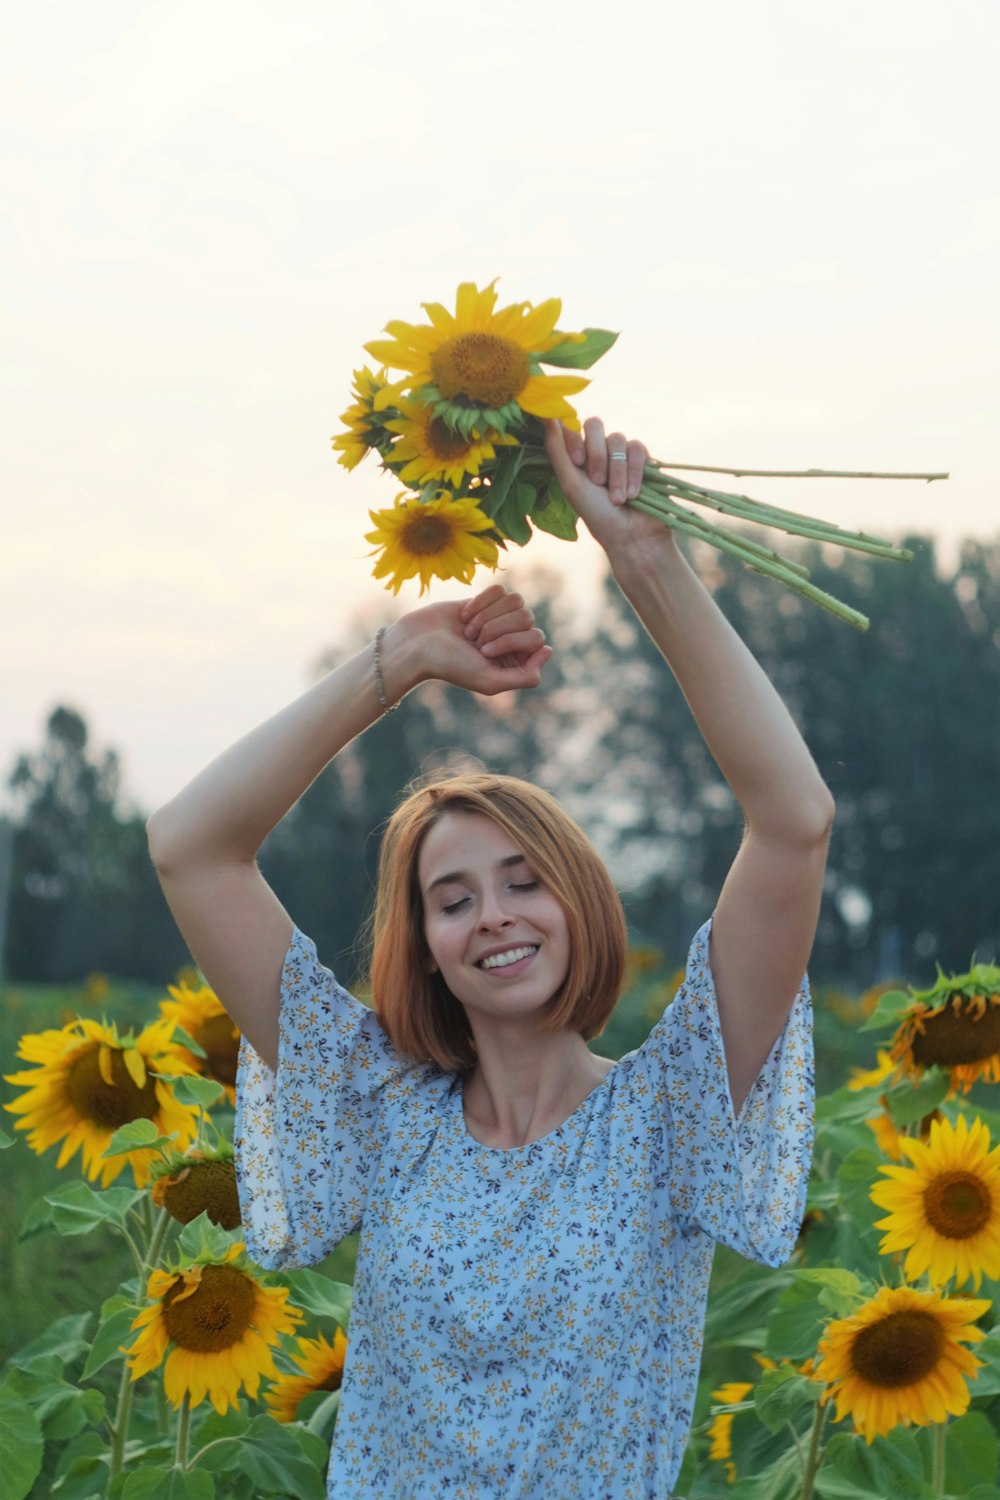 woman in blue and white floral dress holding sunflower during daytime